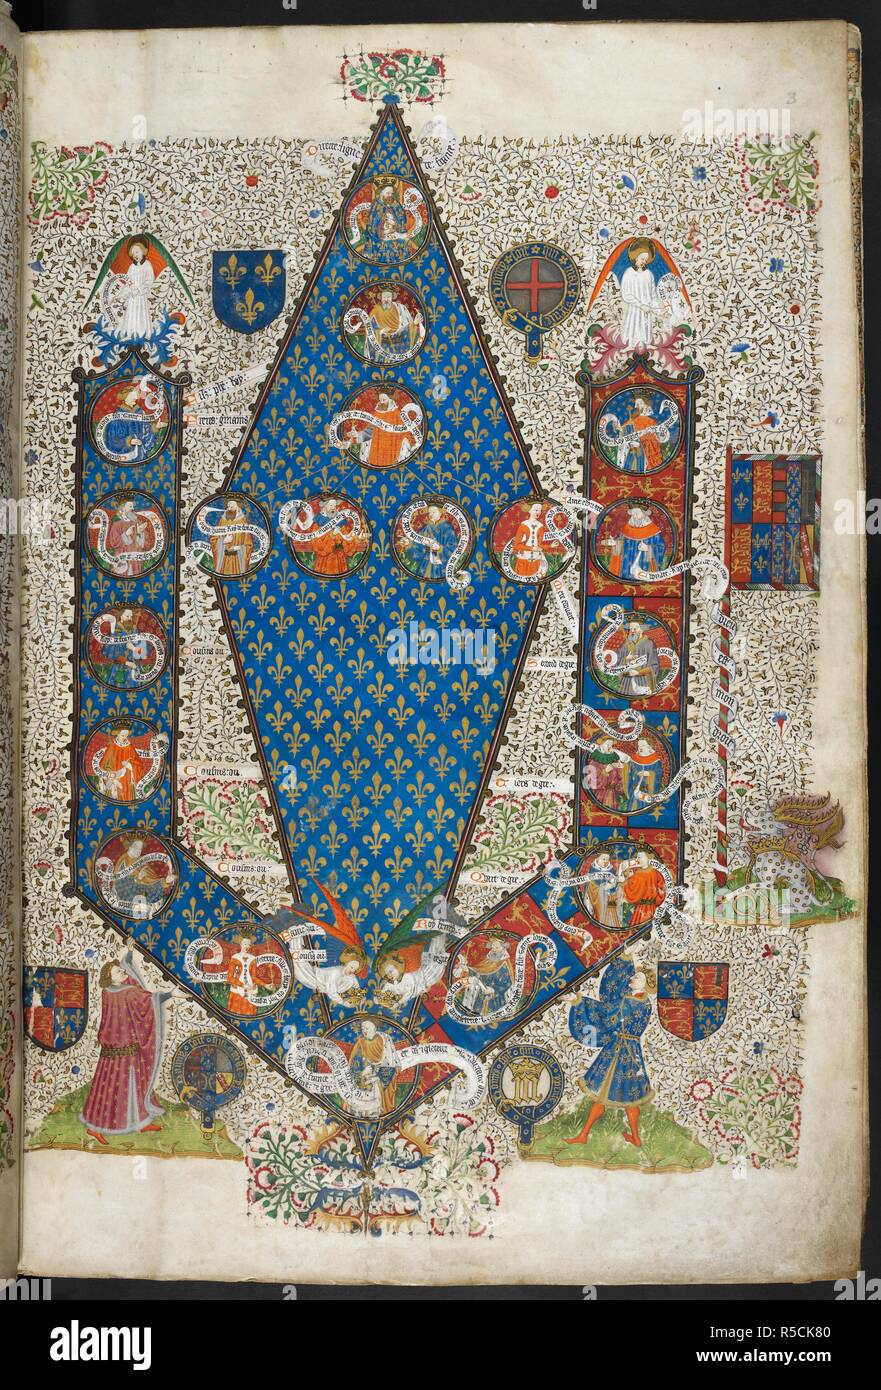 The genealogical table of descendants of Louis IX in the form of a fleur-de-lys, with portraits of kings in medallions, supported by Humfrey, Duke of Gloucester with his arms and the arms of Anjou encircled by the Garter, and Richard, Duke of York with his arms and an initial 'M' encircled by the Garter; the arms of France and of George encircled by the Garter, and a banner bearing the royal arms of England impaled with the arms of Anjou, wrapped with a scroll inscribed with a motto 'Dieu est mon droit', and supported by the royal device of an antelope with a crown and chain. Shrewsbury Talbot Stock Photo